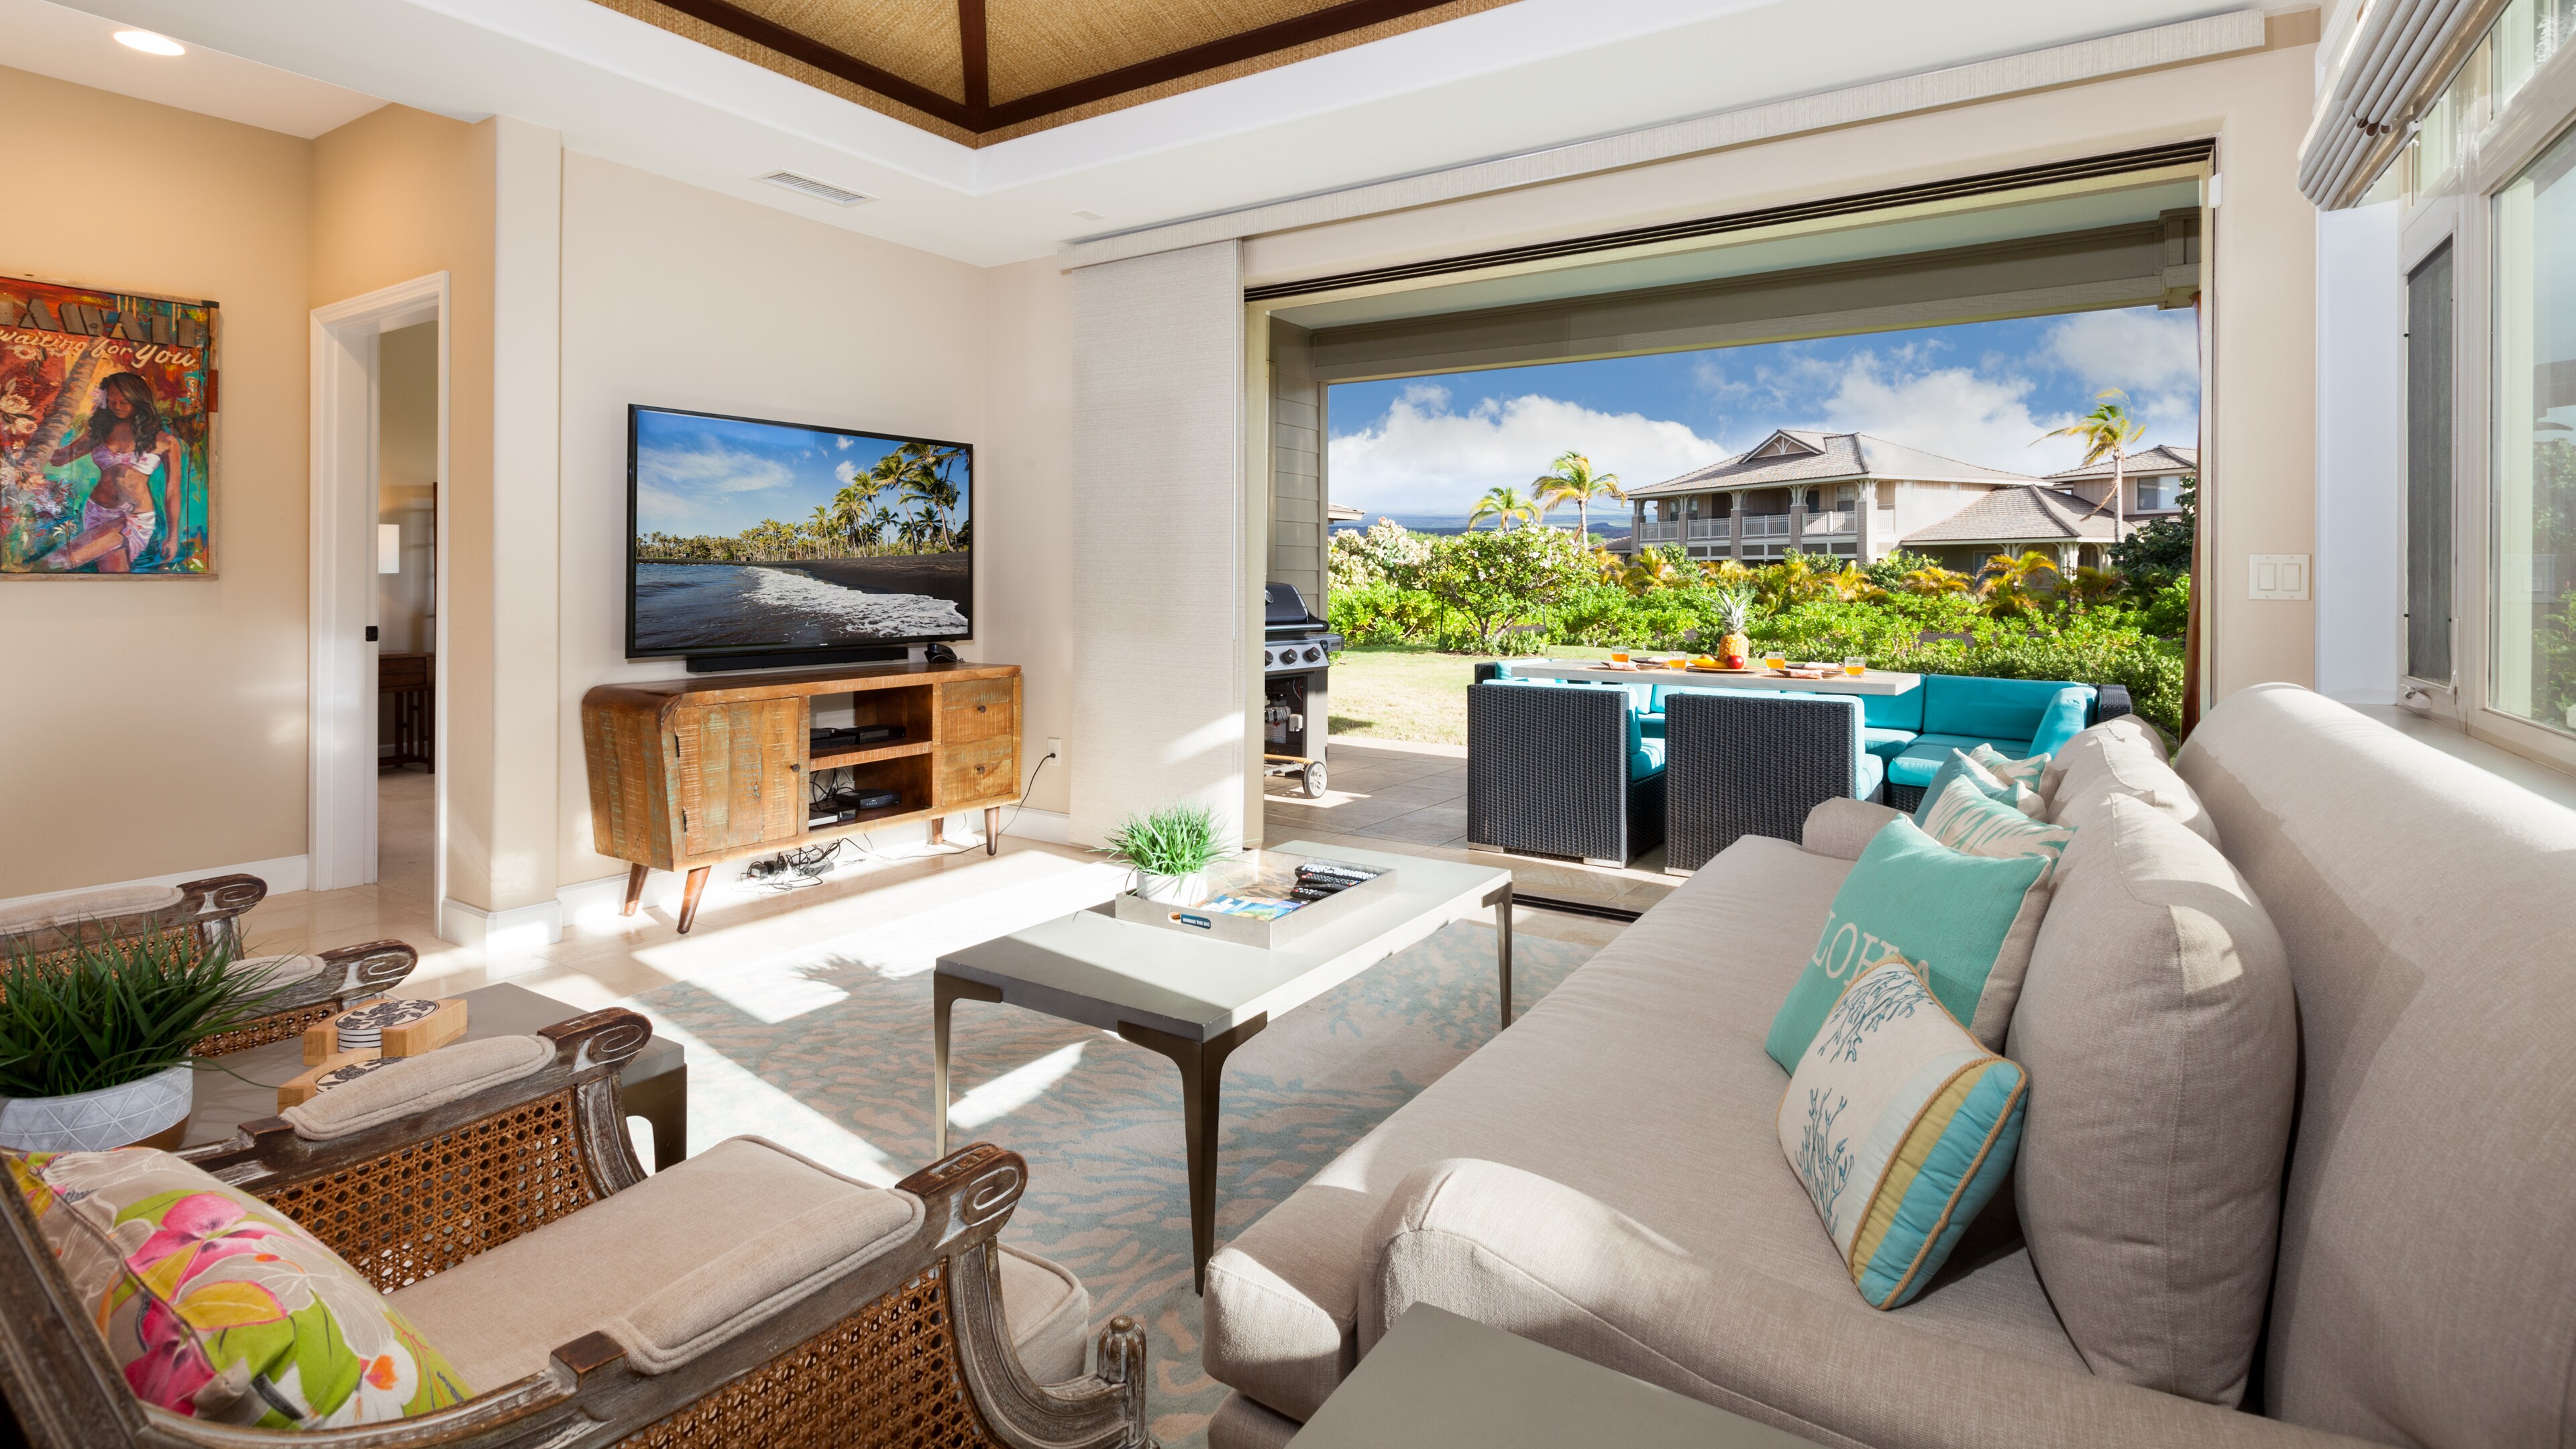 Large living room with pocket door to lanai outdoor dining and living area